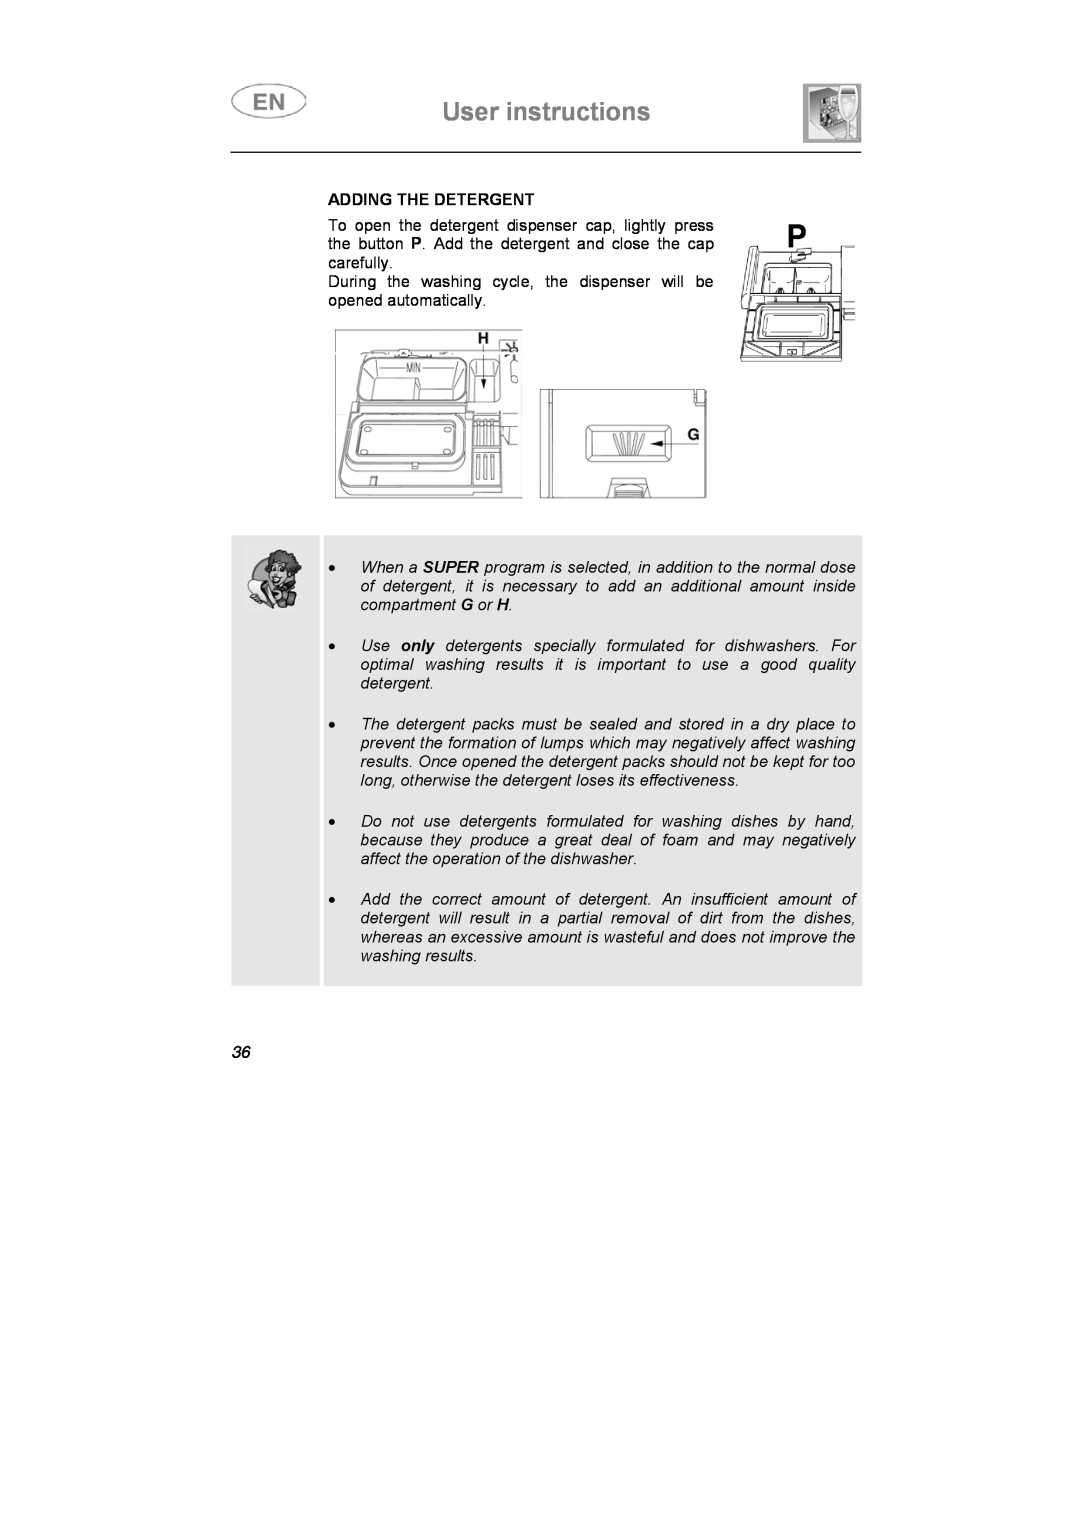 Smeg LSP1453B, LSP1453X1, LSP1453N manual User instructions, Adding The Detergent 